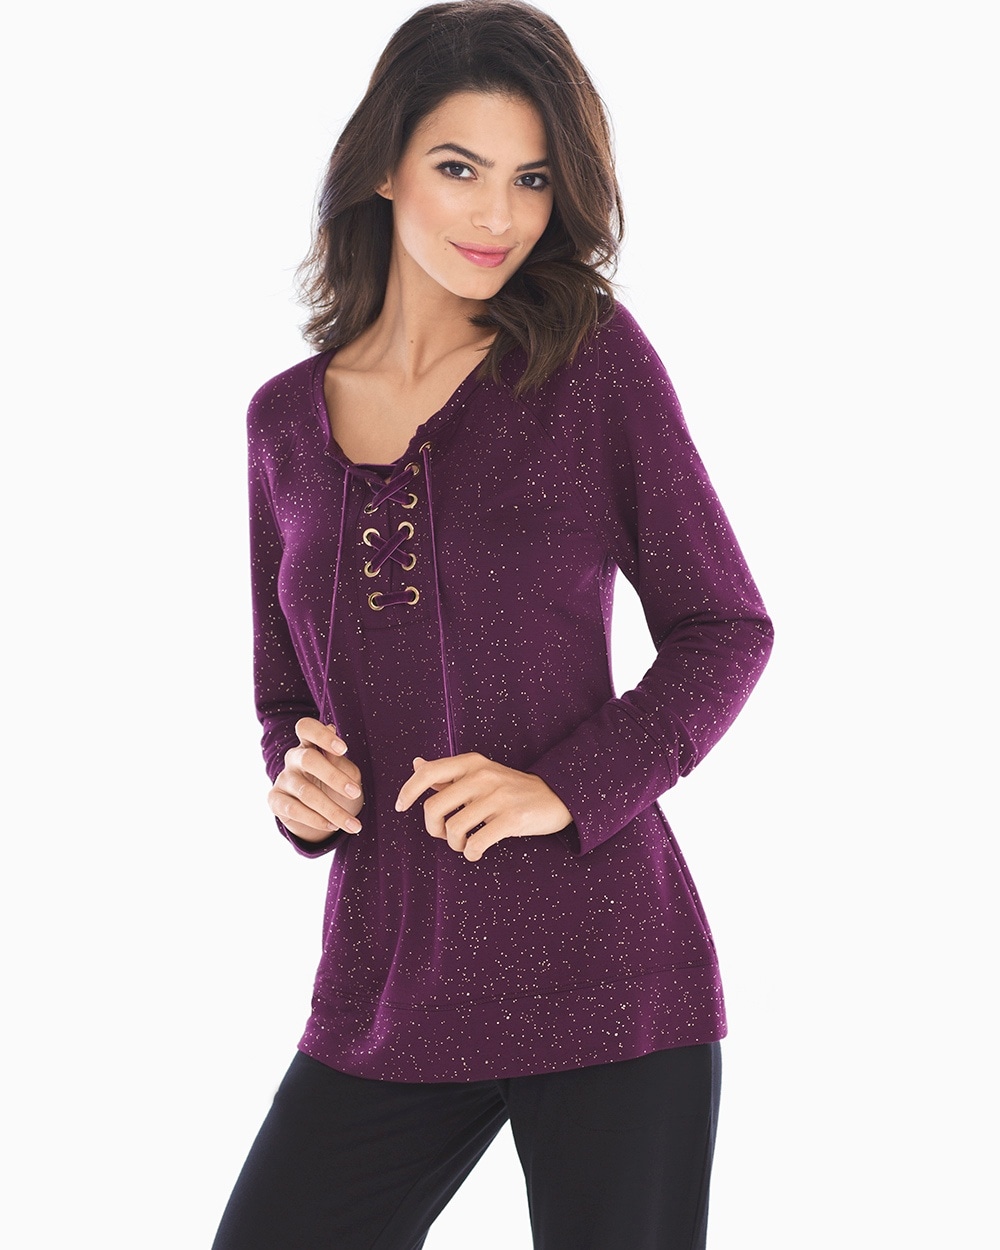 French Terry Lace Up Sweatshirt Glittered Bordeaux